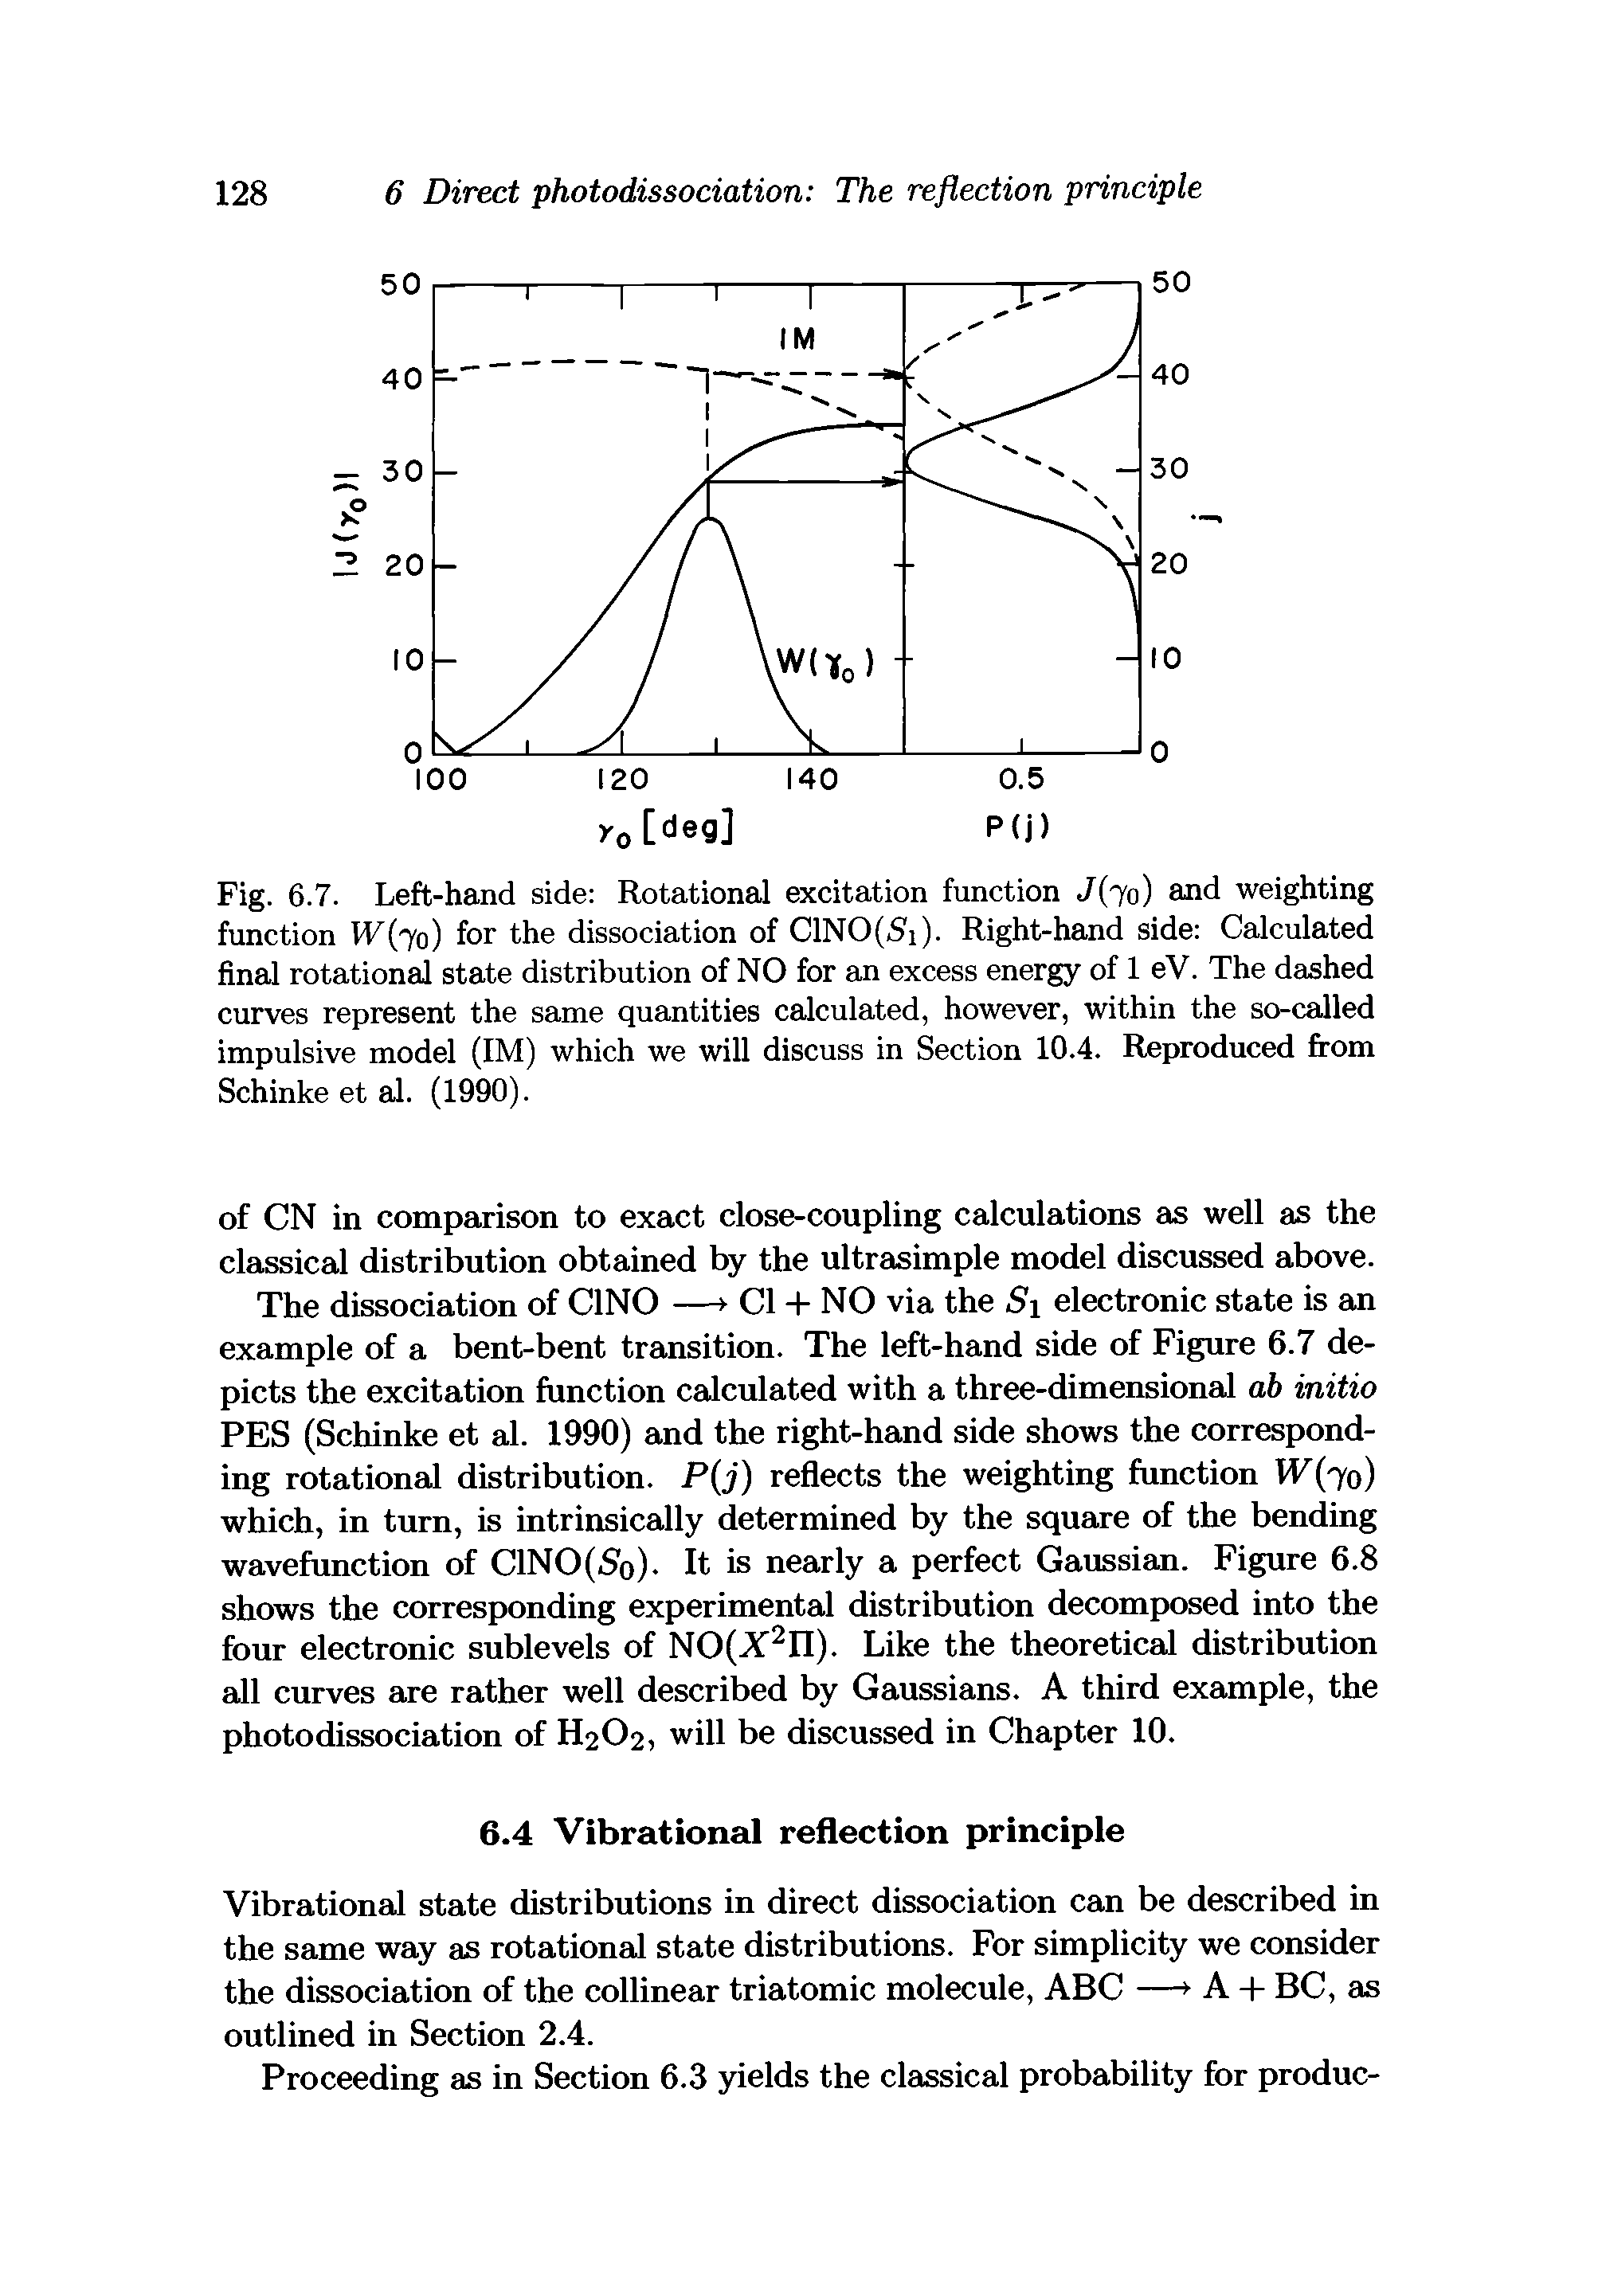 Fig. 6.7. Left-hand side Rotational excitation function J(70) and weighting function W(70) for the dissociation of ClNO(Si). Right-hand side Calculated final rotational state distribution of NO for an excess energy of 1 eV. The dashed curves represent the same quantities calculated, however, within the so-called impulsive model (IM) which we will discuss in Section 10.4. Reproduced from Schinke et al. (1990).